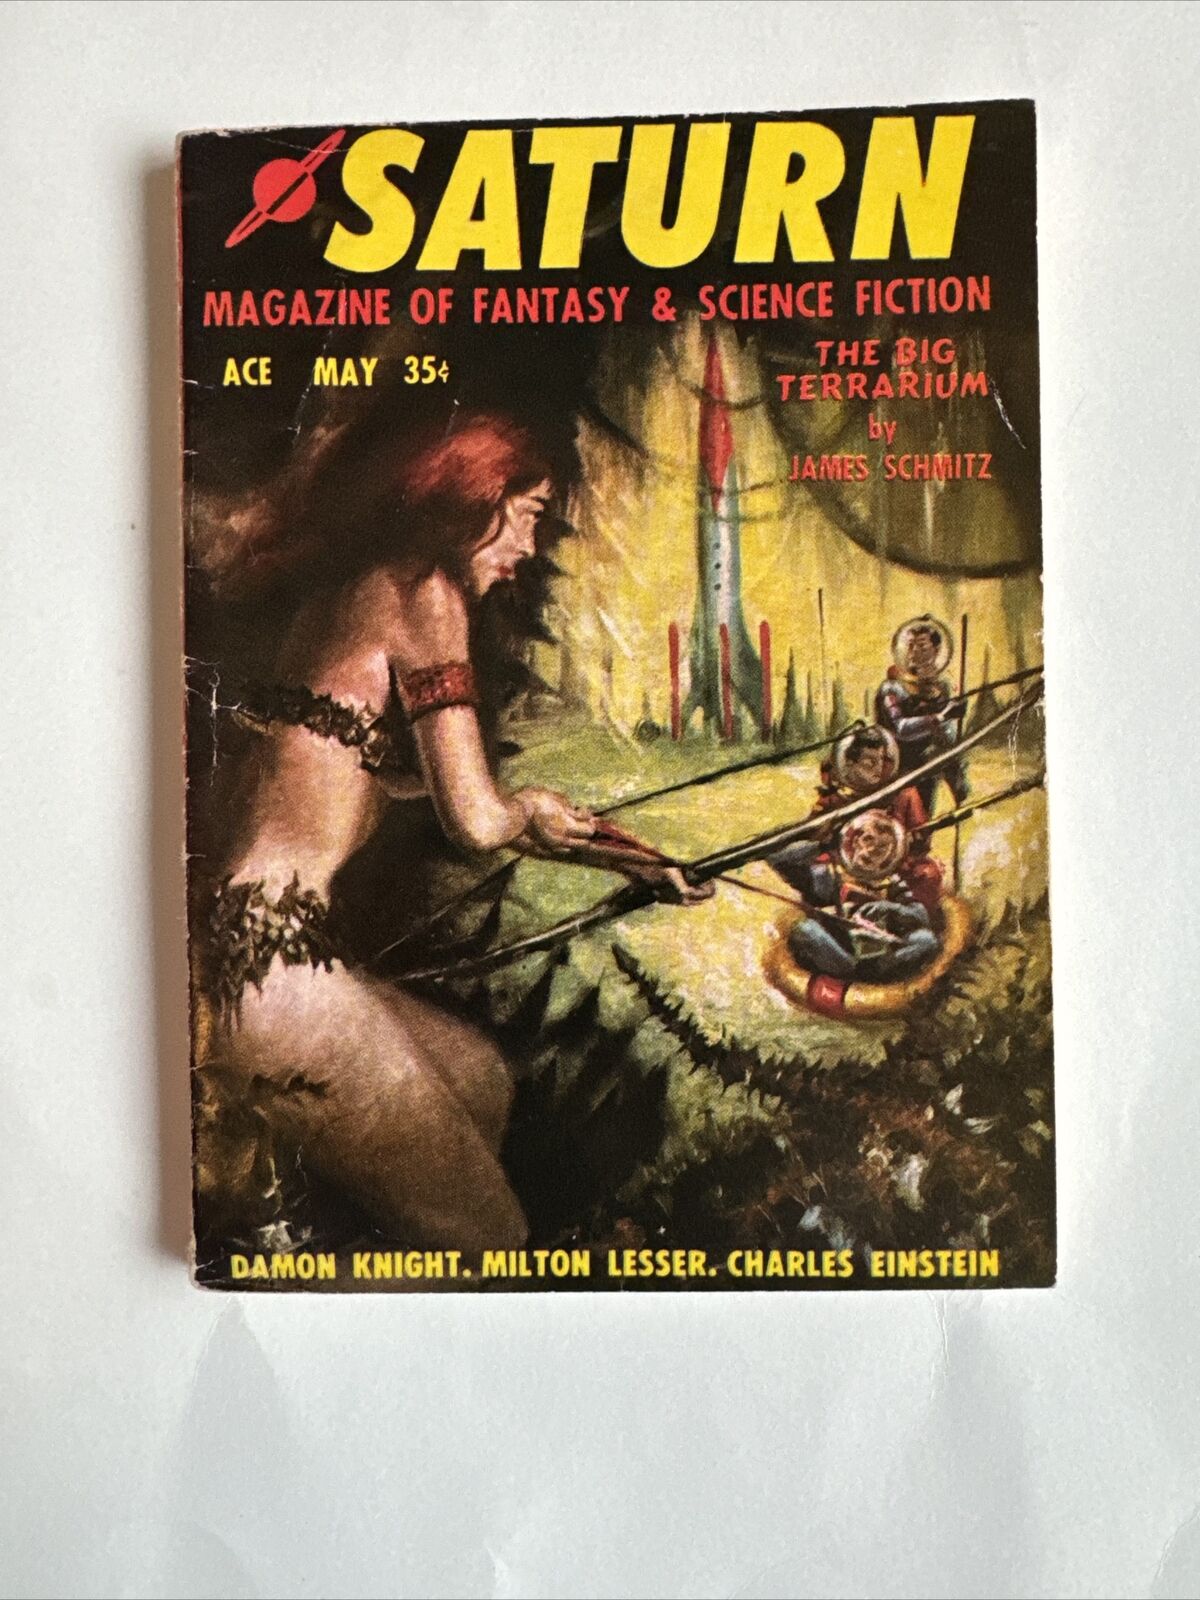 Saturn Science Fiction and Fantasy Pulp Vol. 1 #2  1957